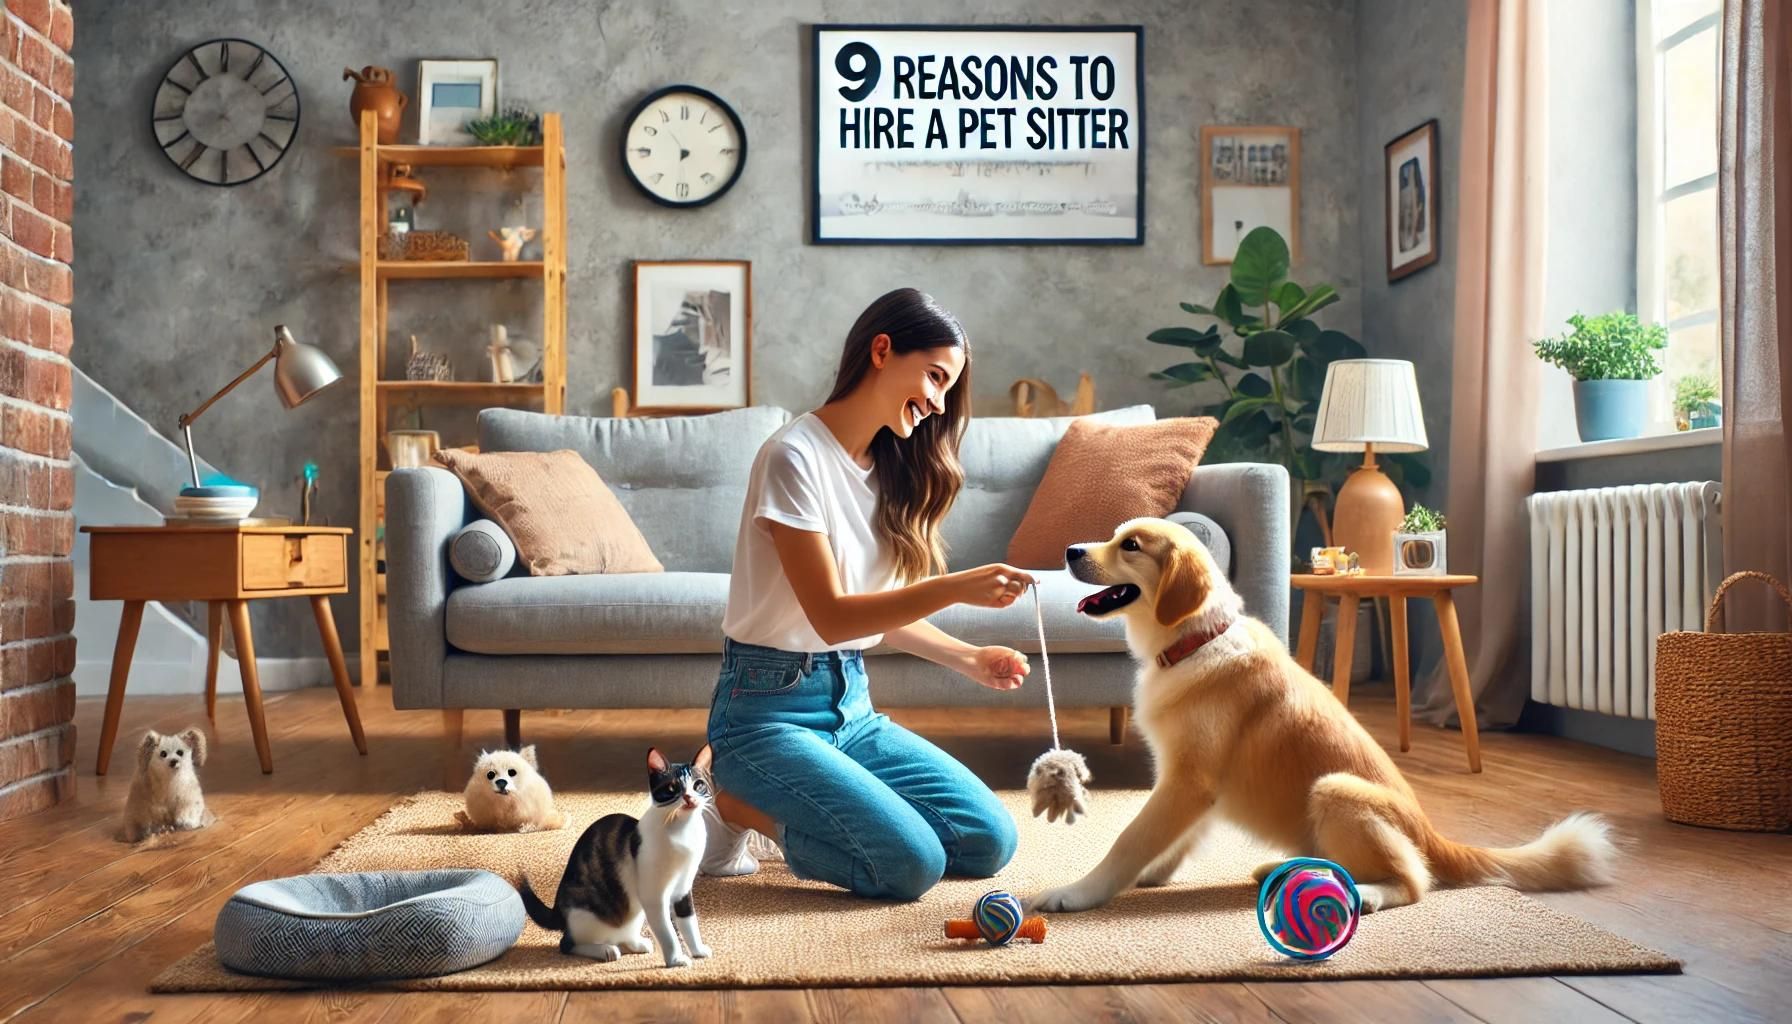 9 Reasons to Hire a Pet Sitter